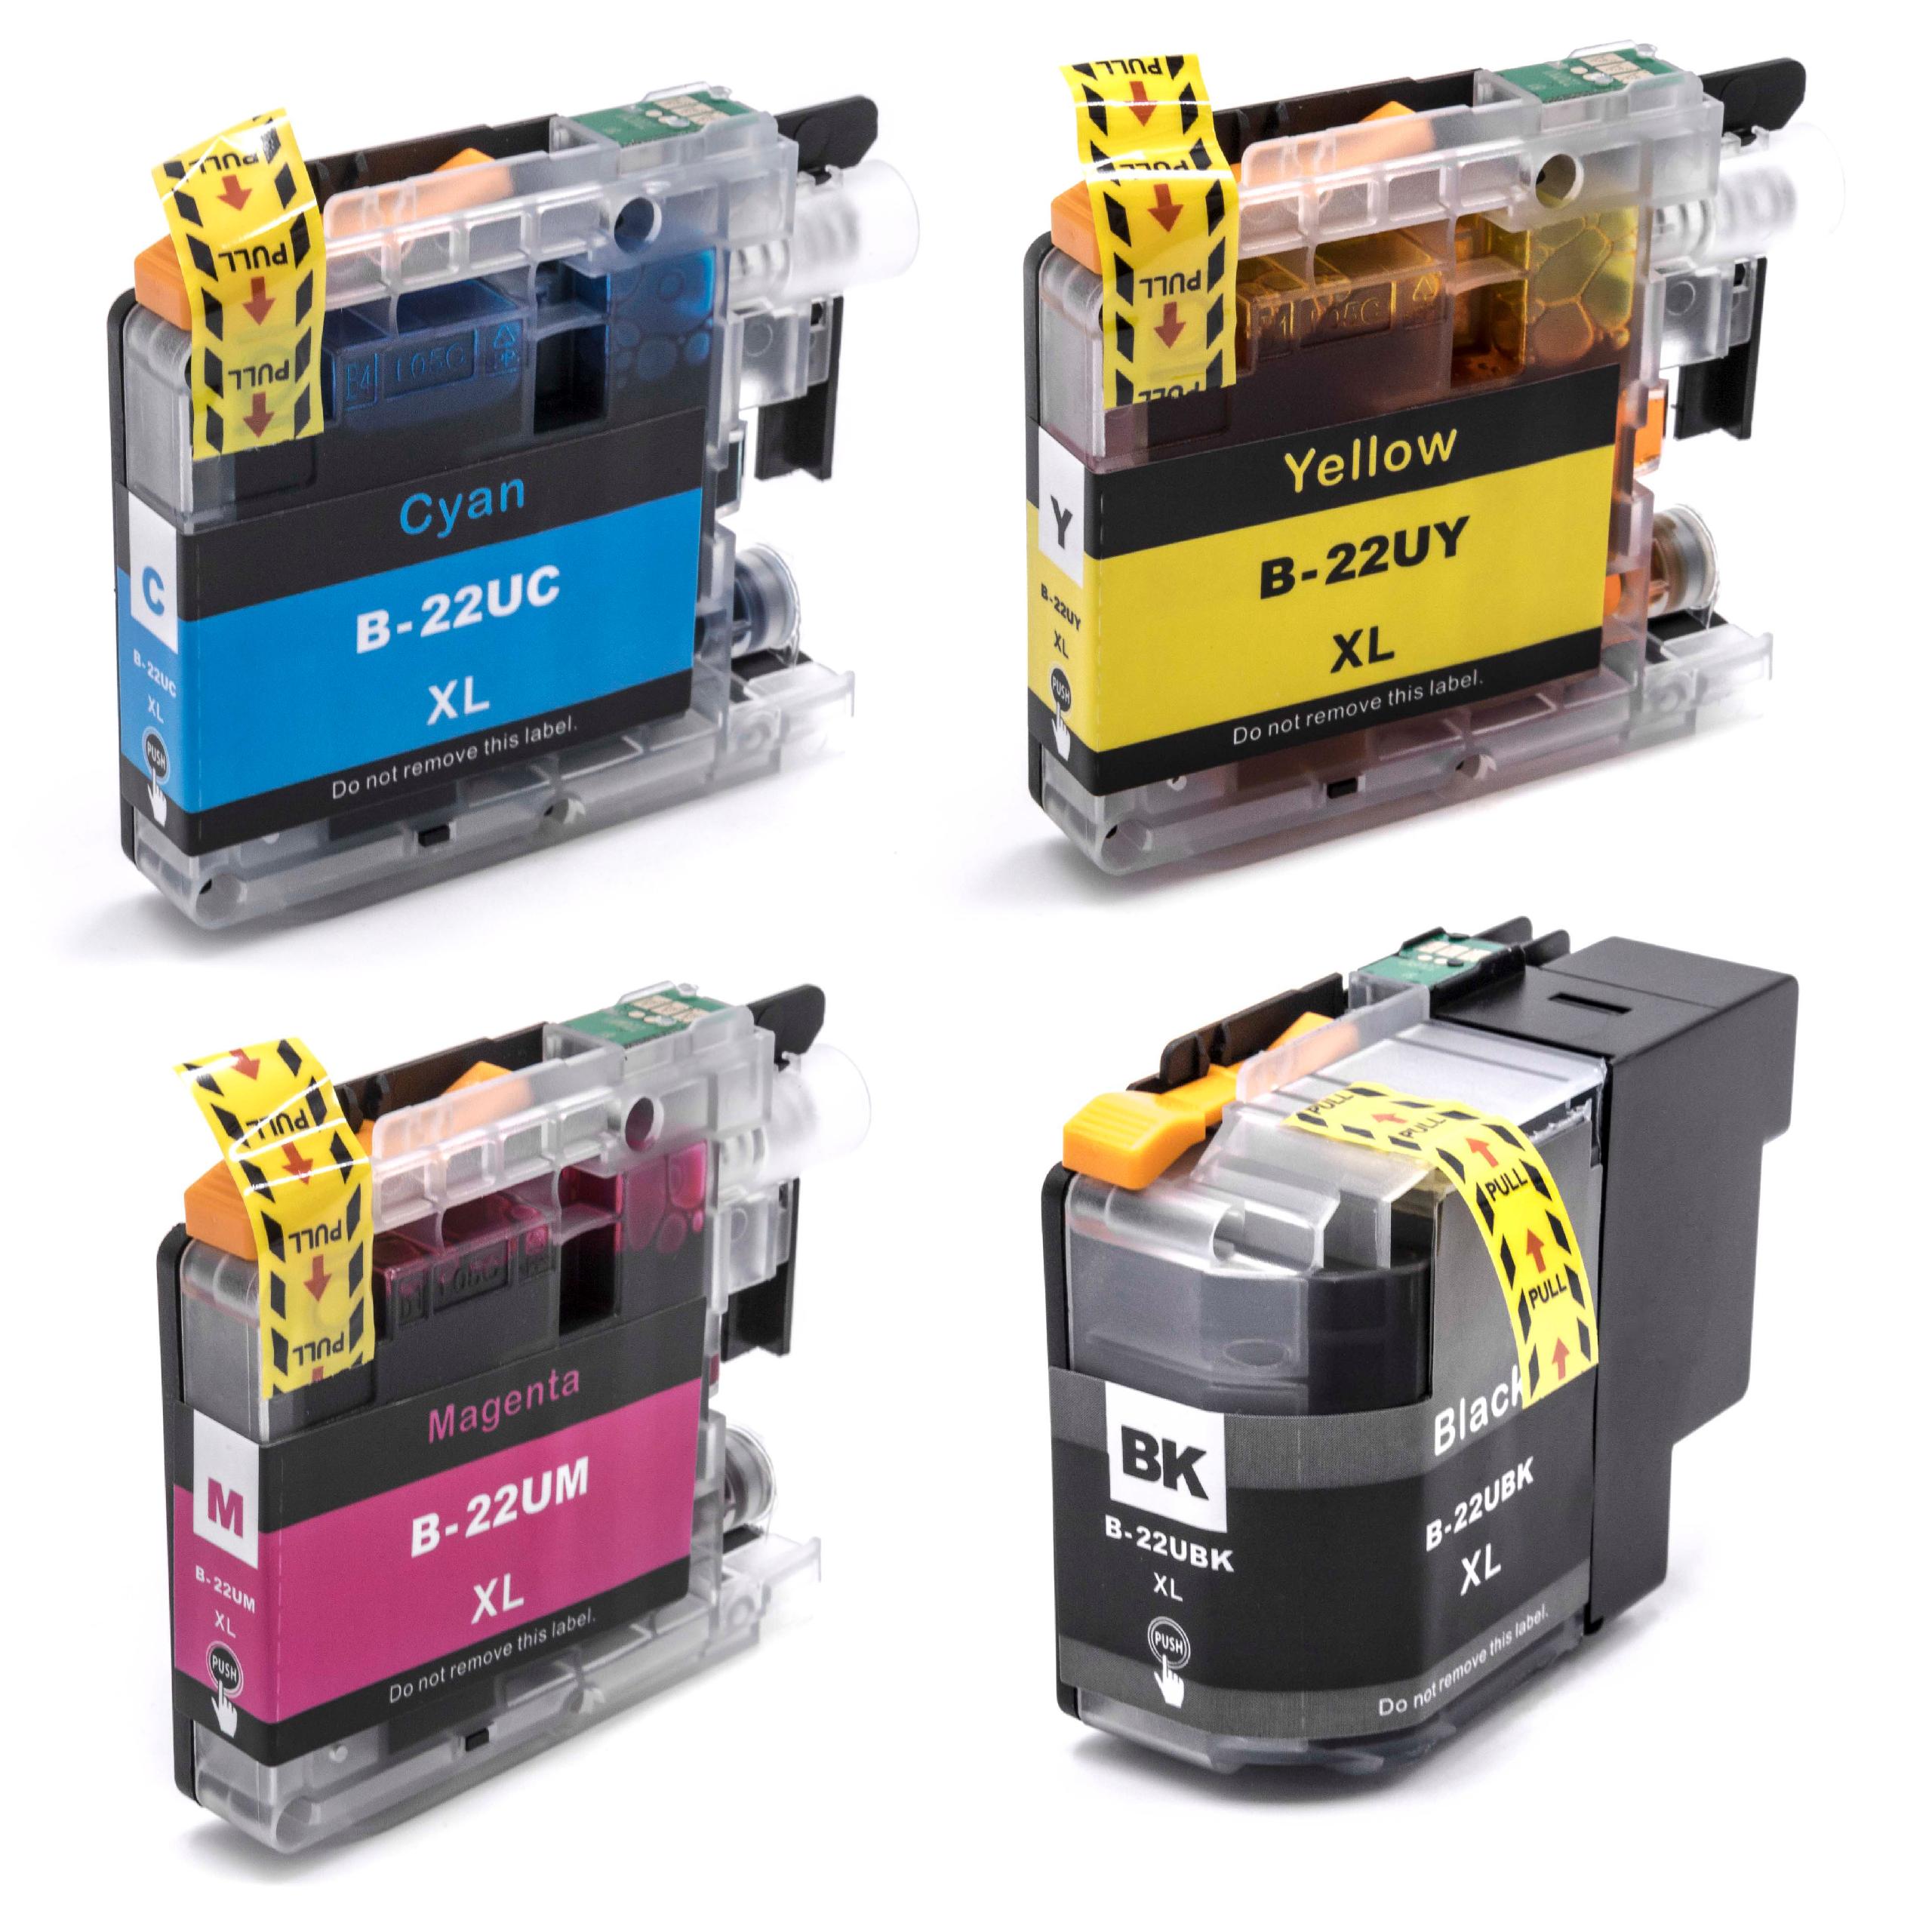 4x Ink Cartridges replaces Brother LC22UBK, LC-22U BK, LC-22UBK for DCP-J925DW Printer - Multi-Coloured